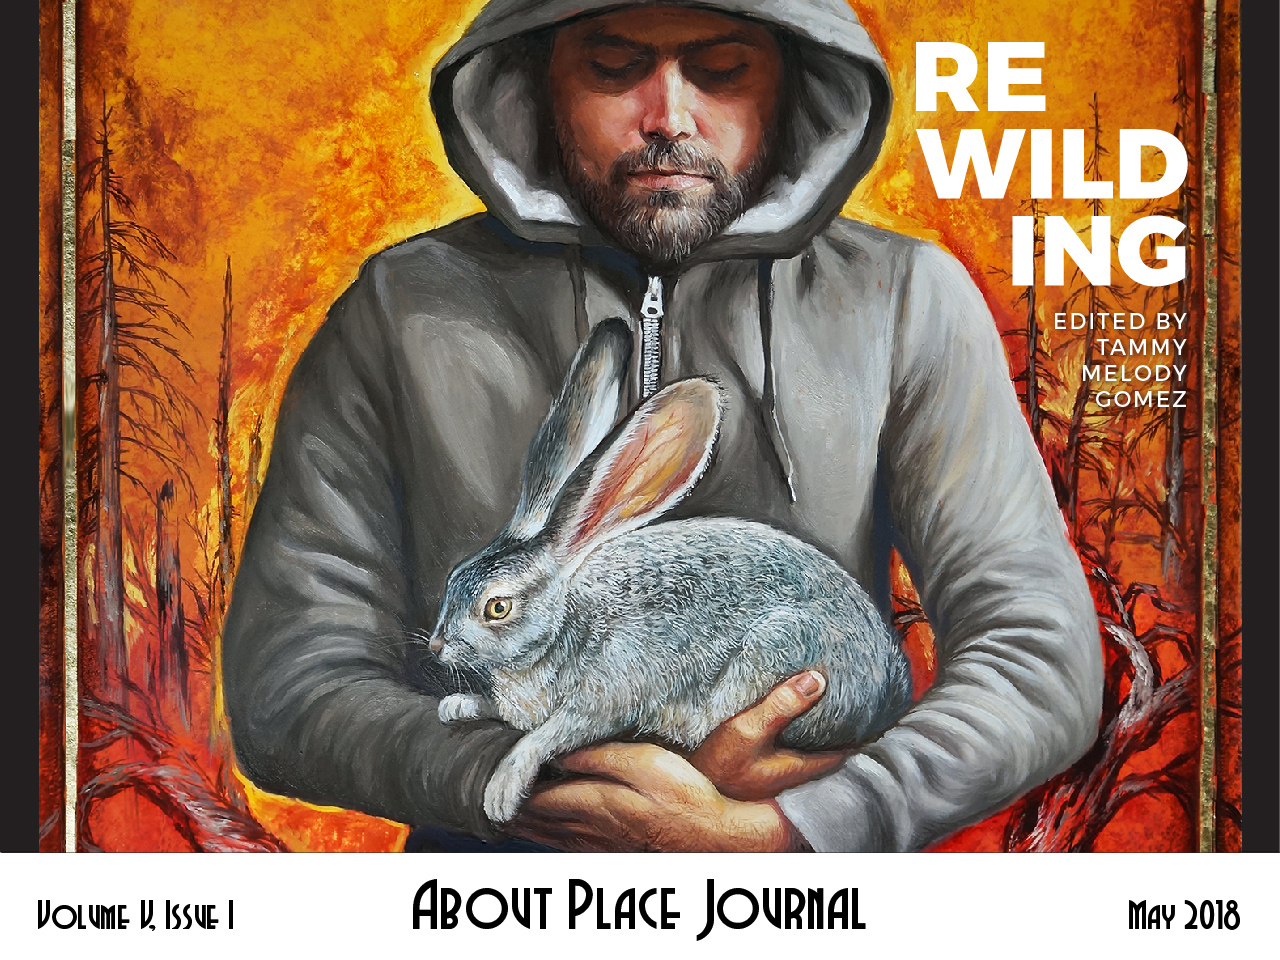 man in a hoodie holding a wild rabbit in front of a fiery landscape / Rewilding / Edited by Tammy Melody Gomez